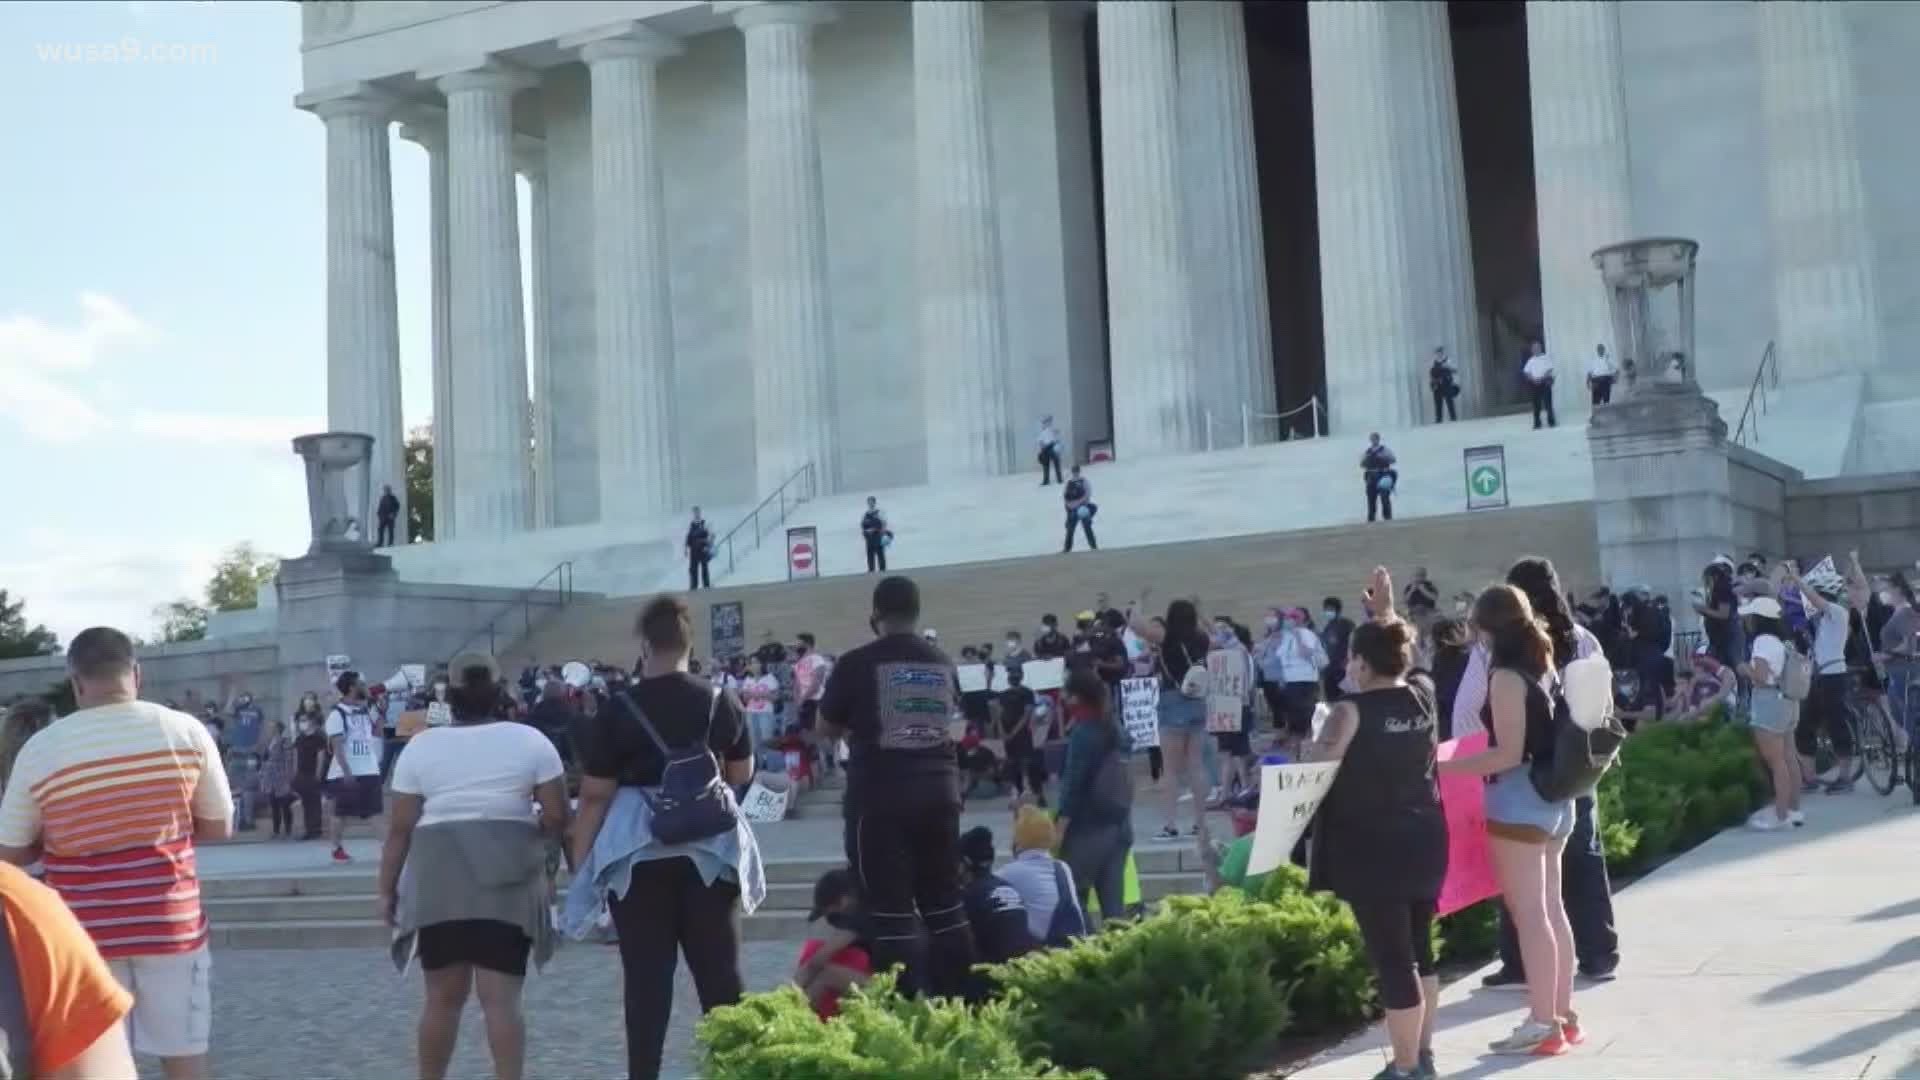 Nearly 200 demonstrators marched up the steps of the Lincoln Memorial calling for commonsense police reform.